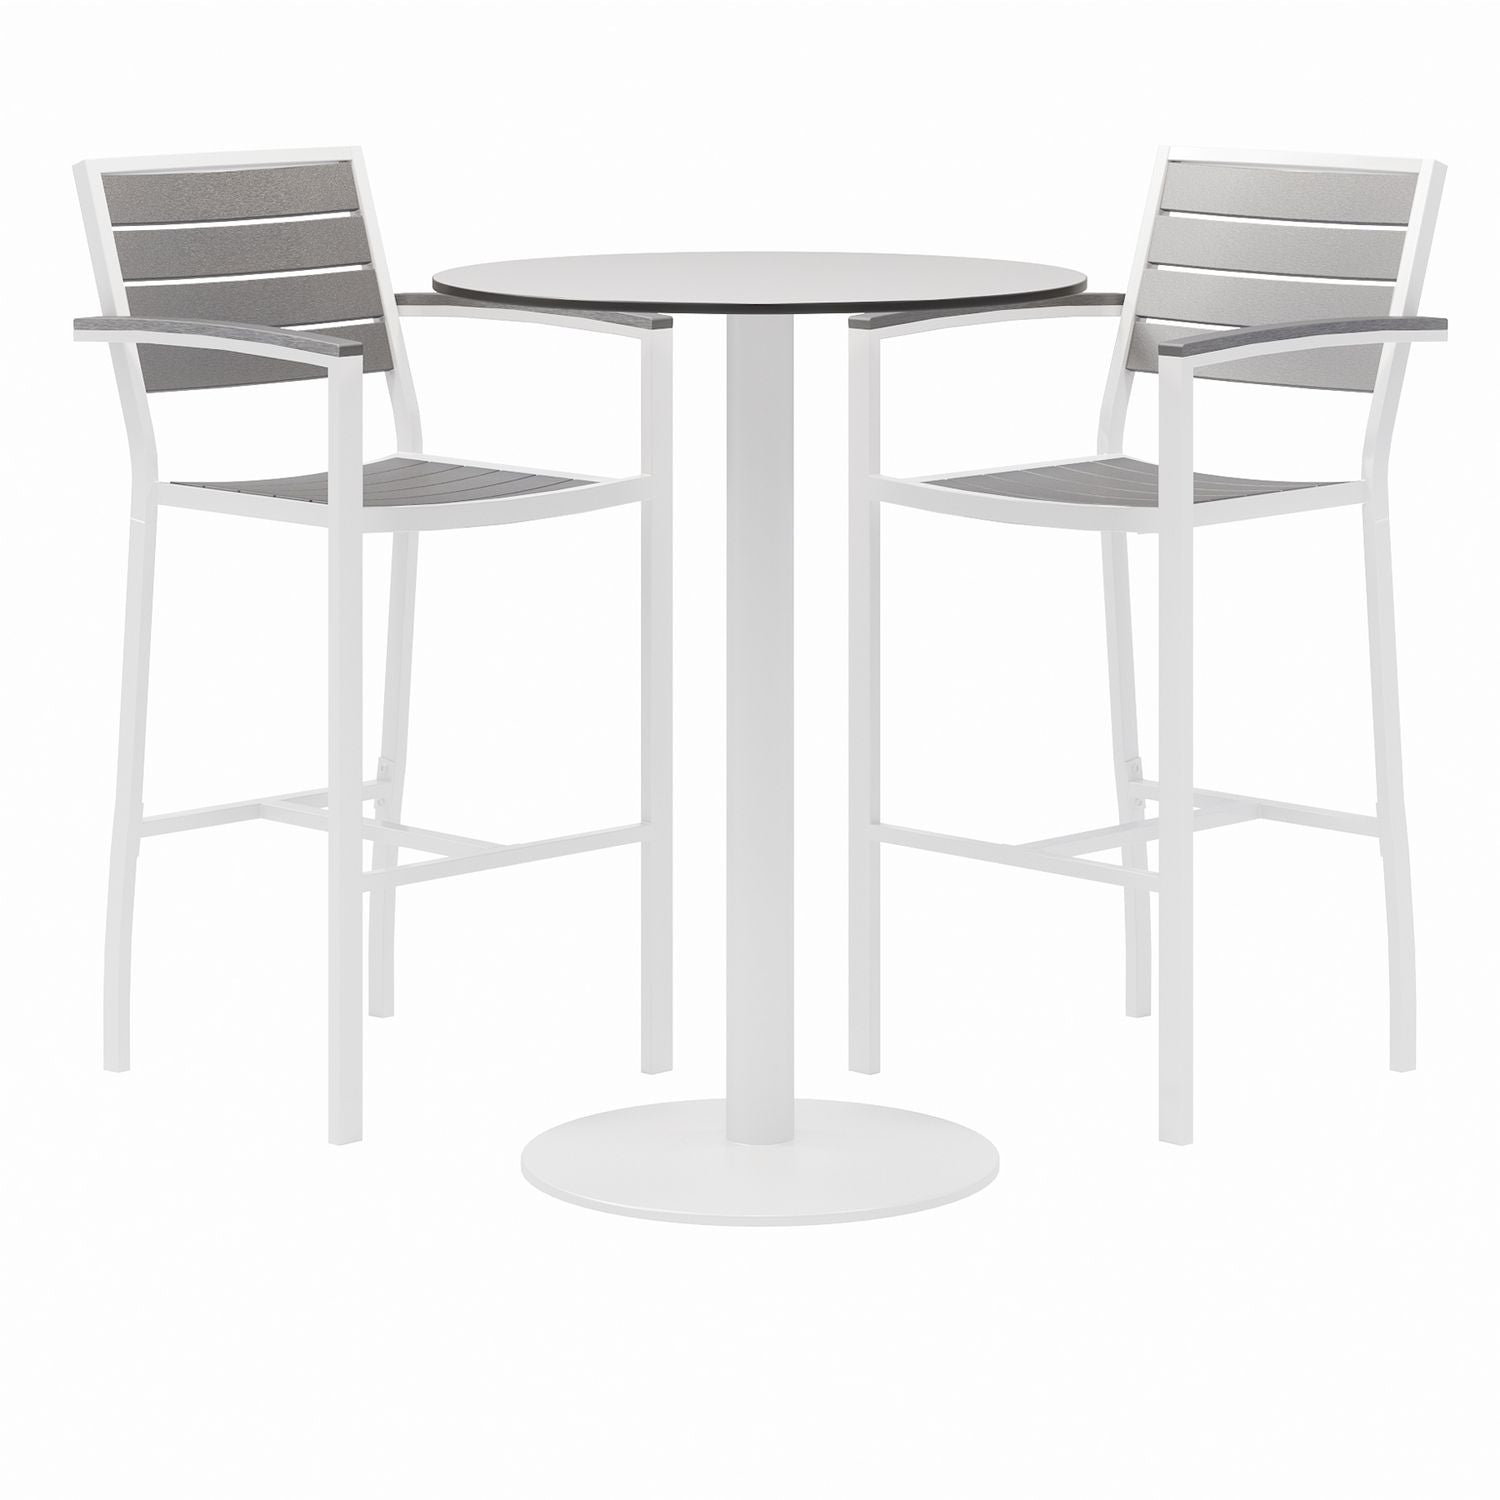 eveleen-outdoor-bistro-patio-table-2-gray-powder-coated-polymer-barstools-round-30-dia-x-41h-whiteships-in-4-6-bus-days_kfi840031918475 - 1